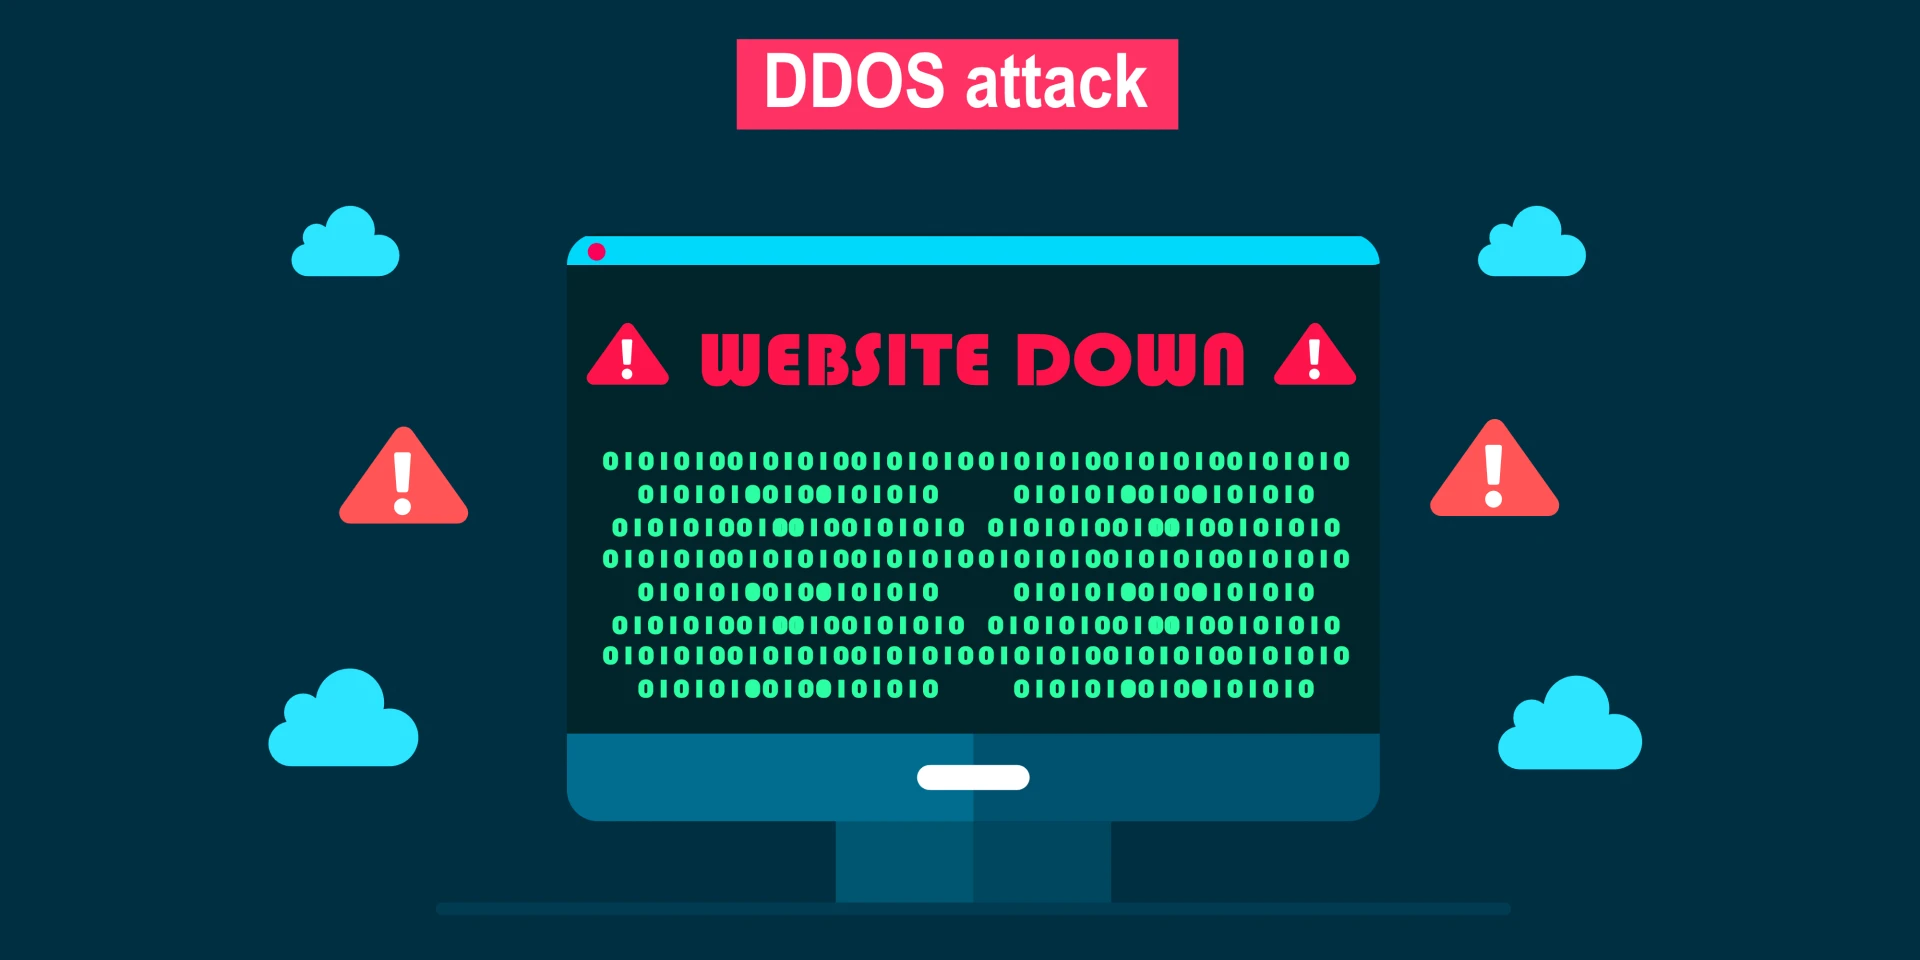 Distributed Denial-of-Service (DDoS) Attacks